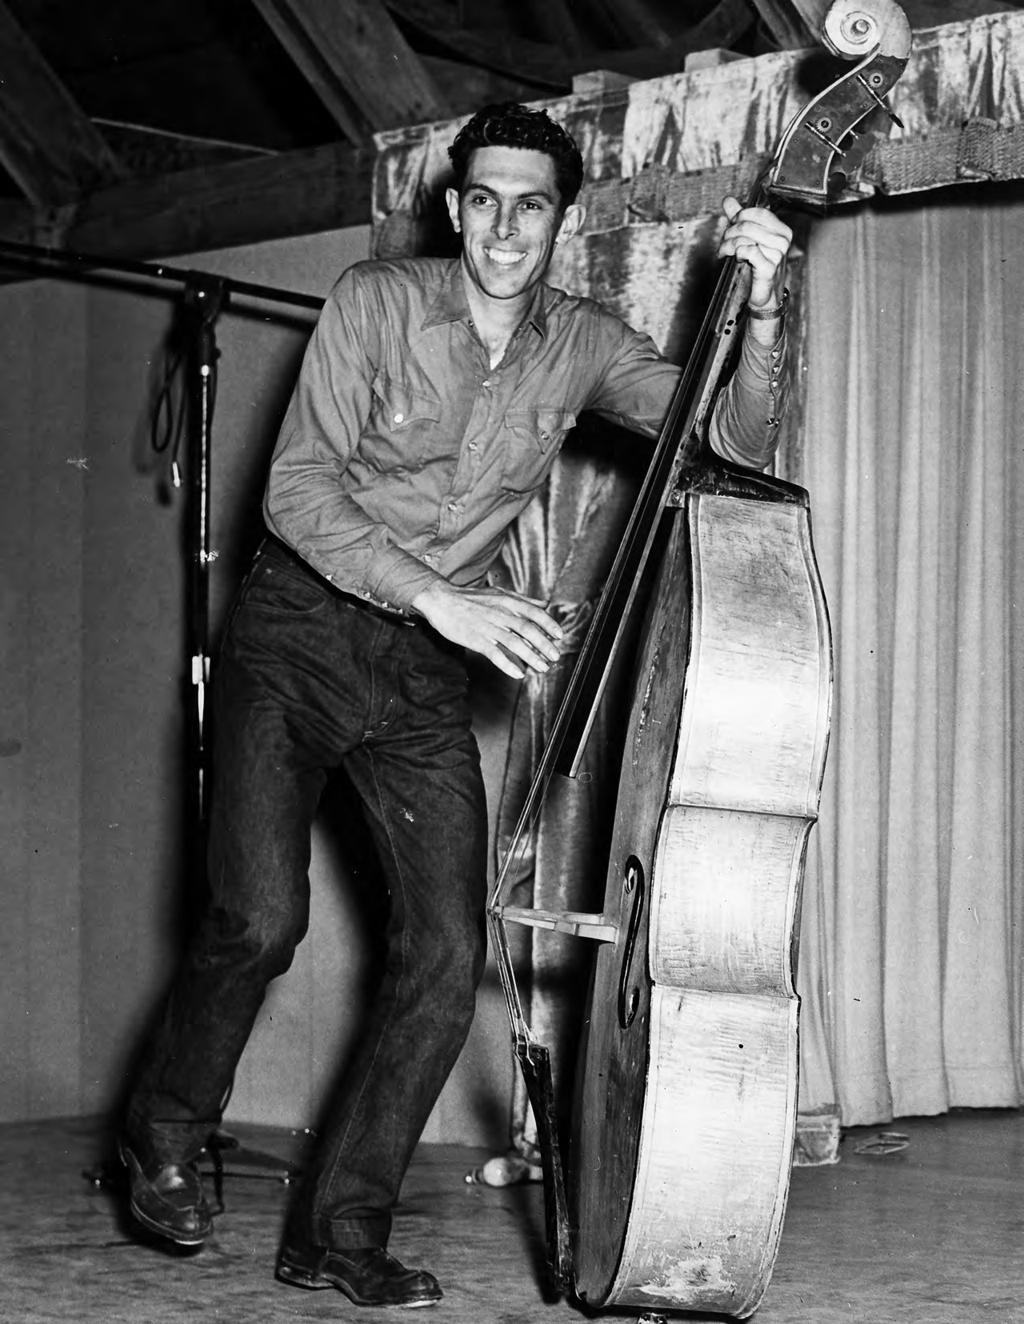 Lee Mace with his baseball bat bass, 1953. Although he had served in the Navy during World War II, during the Korean War Mace was drafted into the Army.